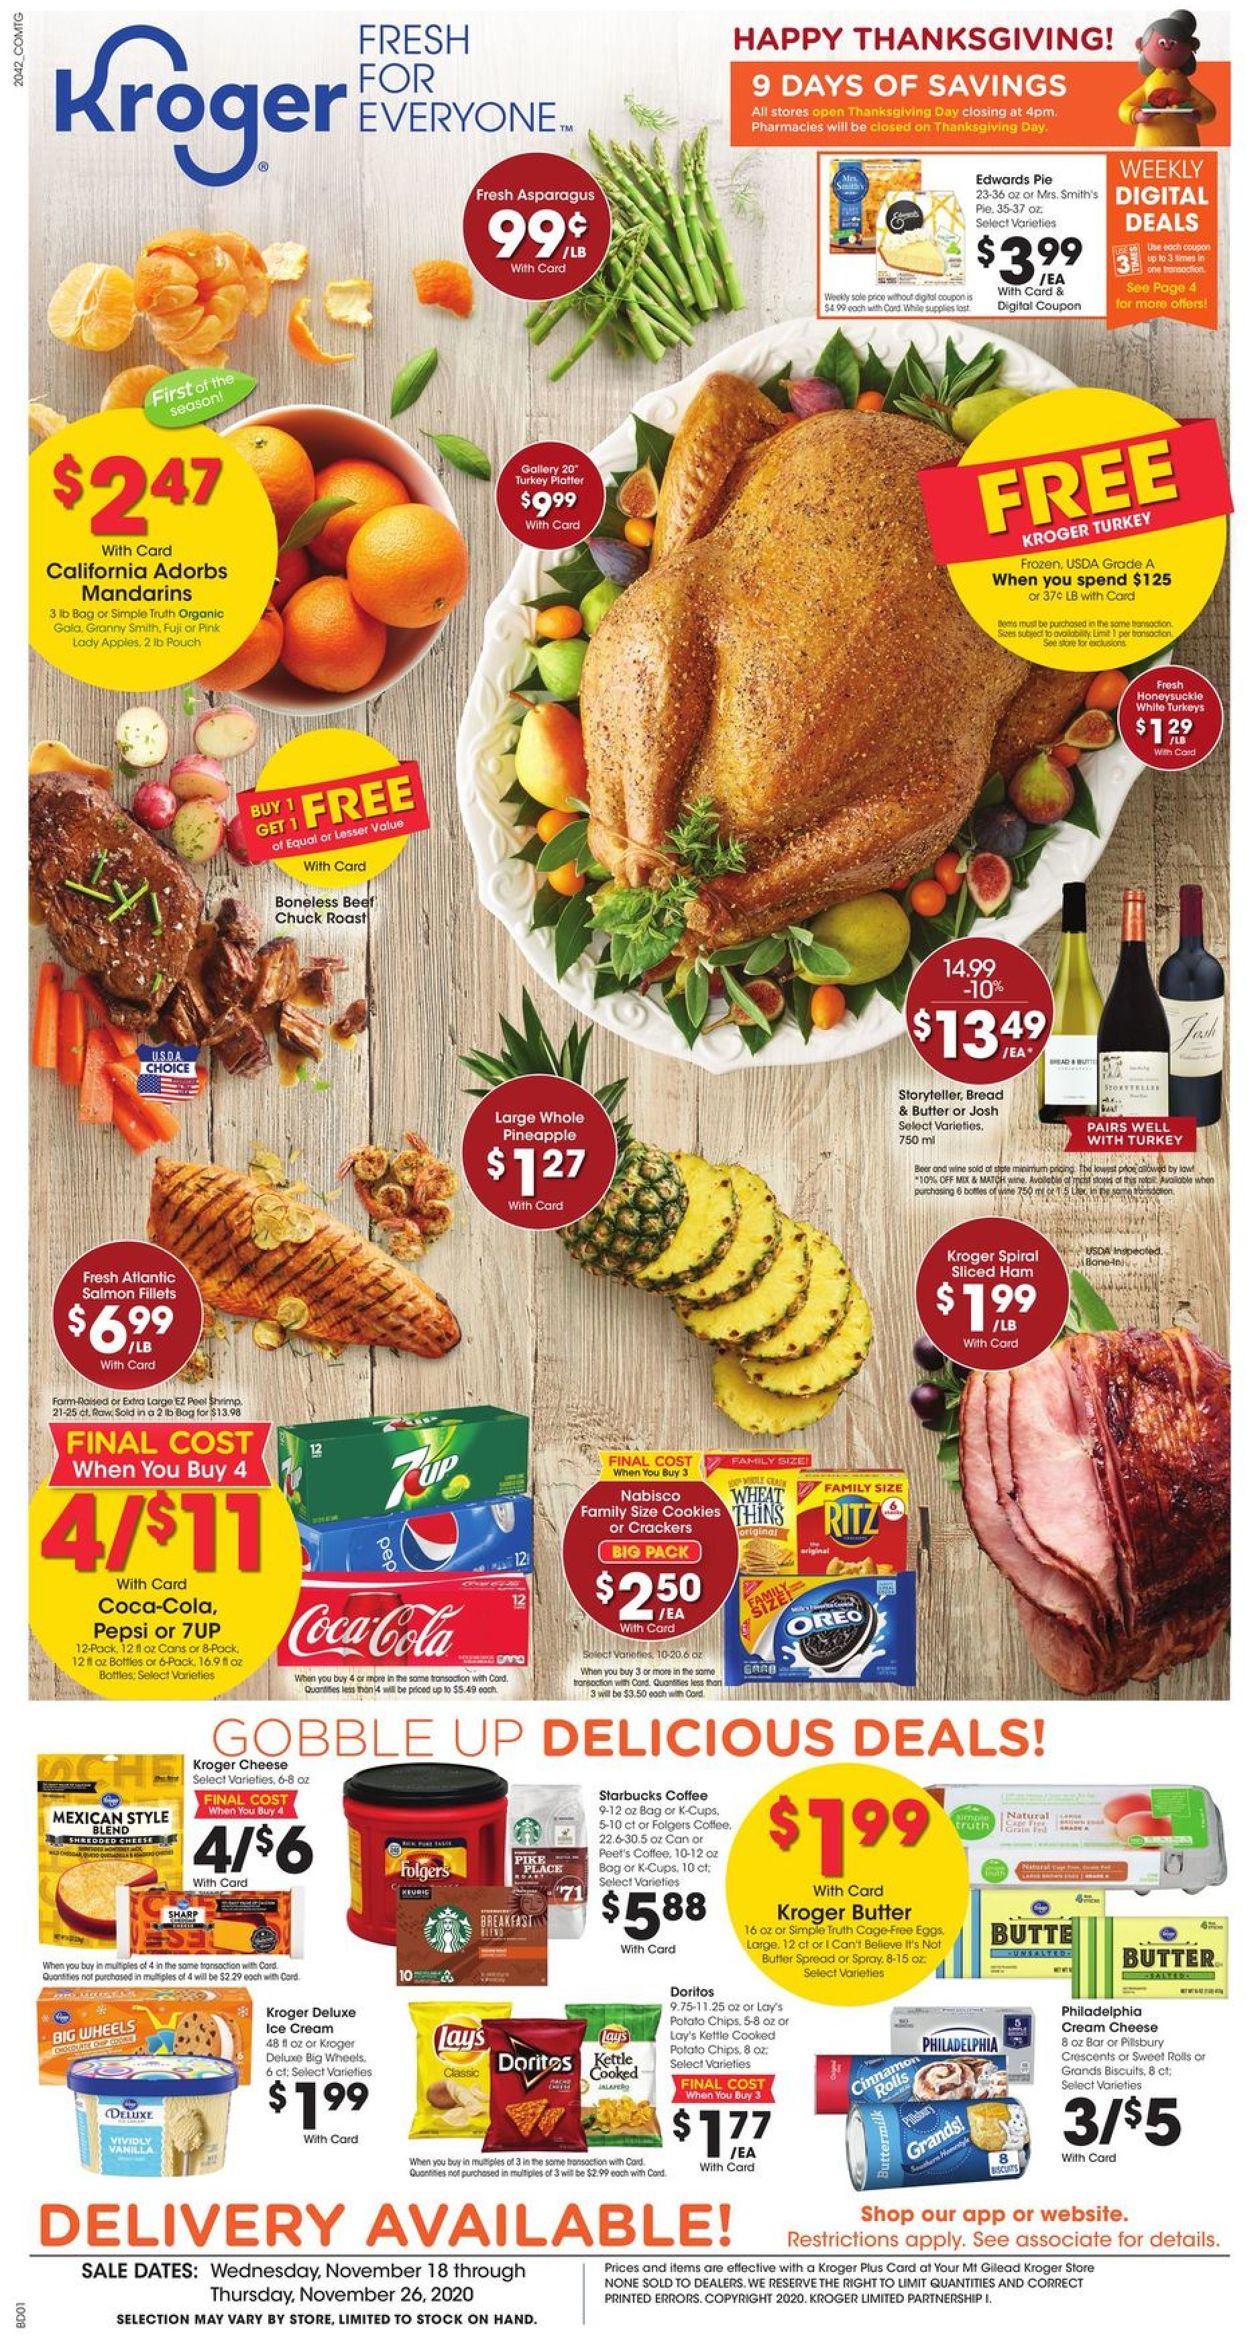 Kroger Thanksgiving 2020 Current weekly ad 11/19 - 11/26/2020